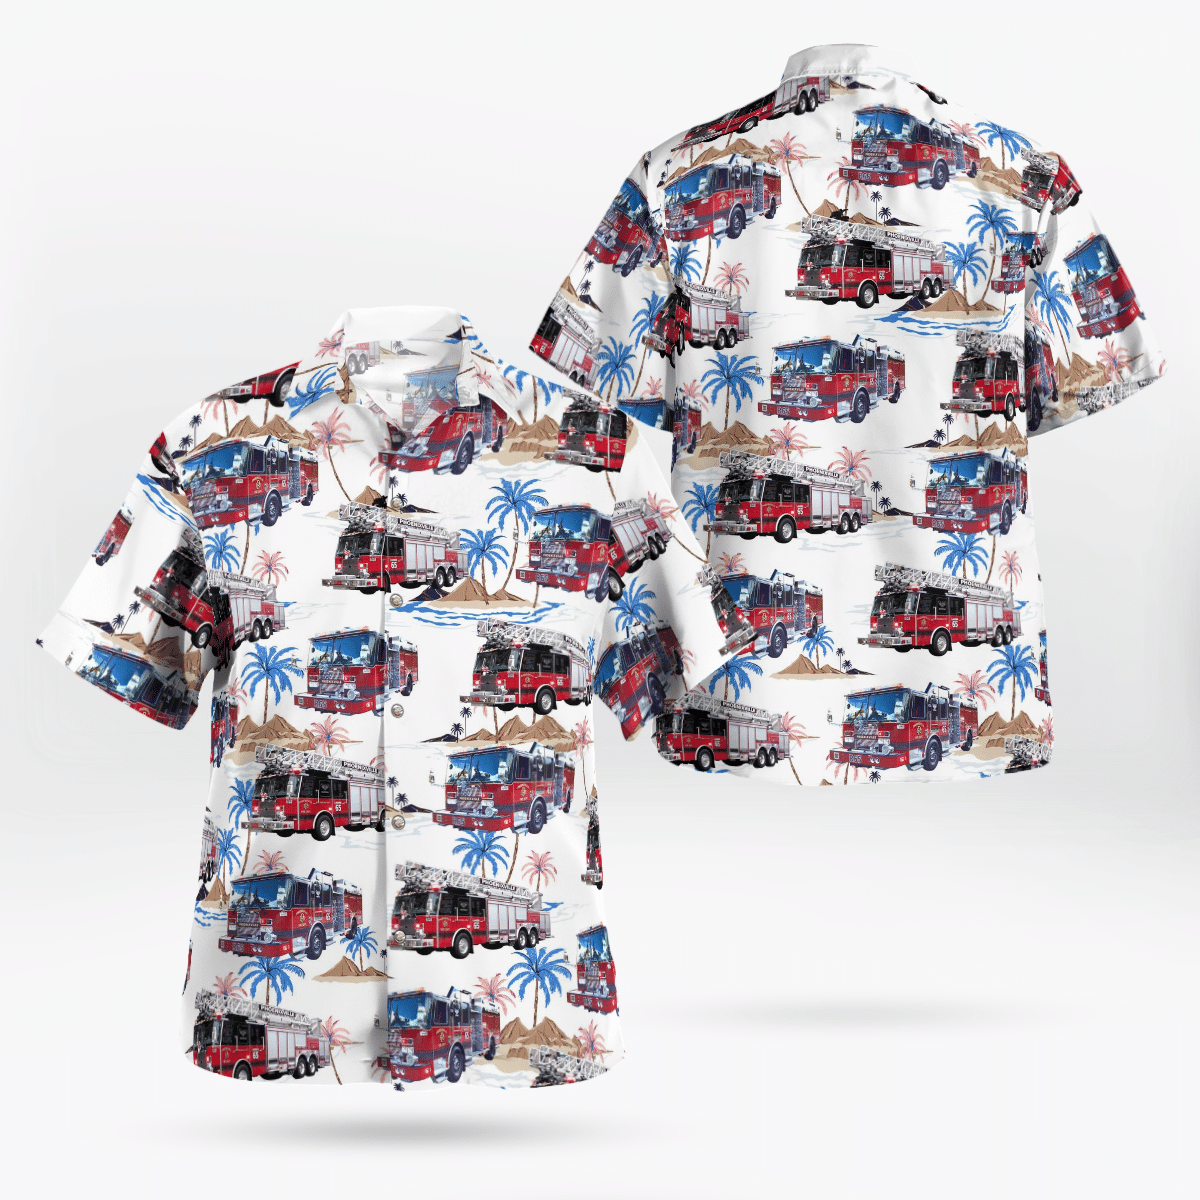 If you want to be noticed, wear These Trendy Hawaiian Shirt 64